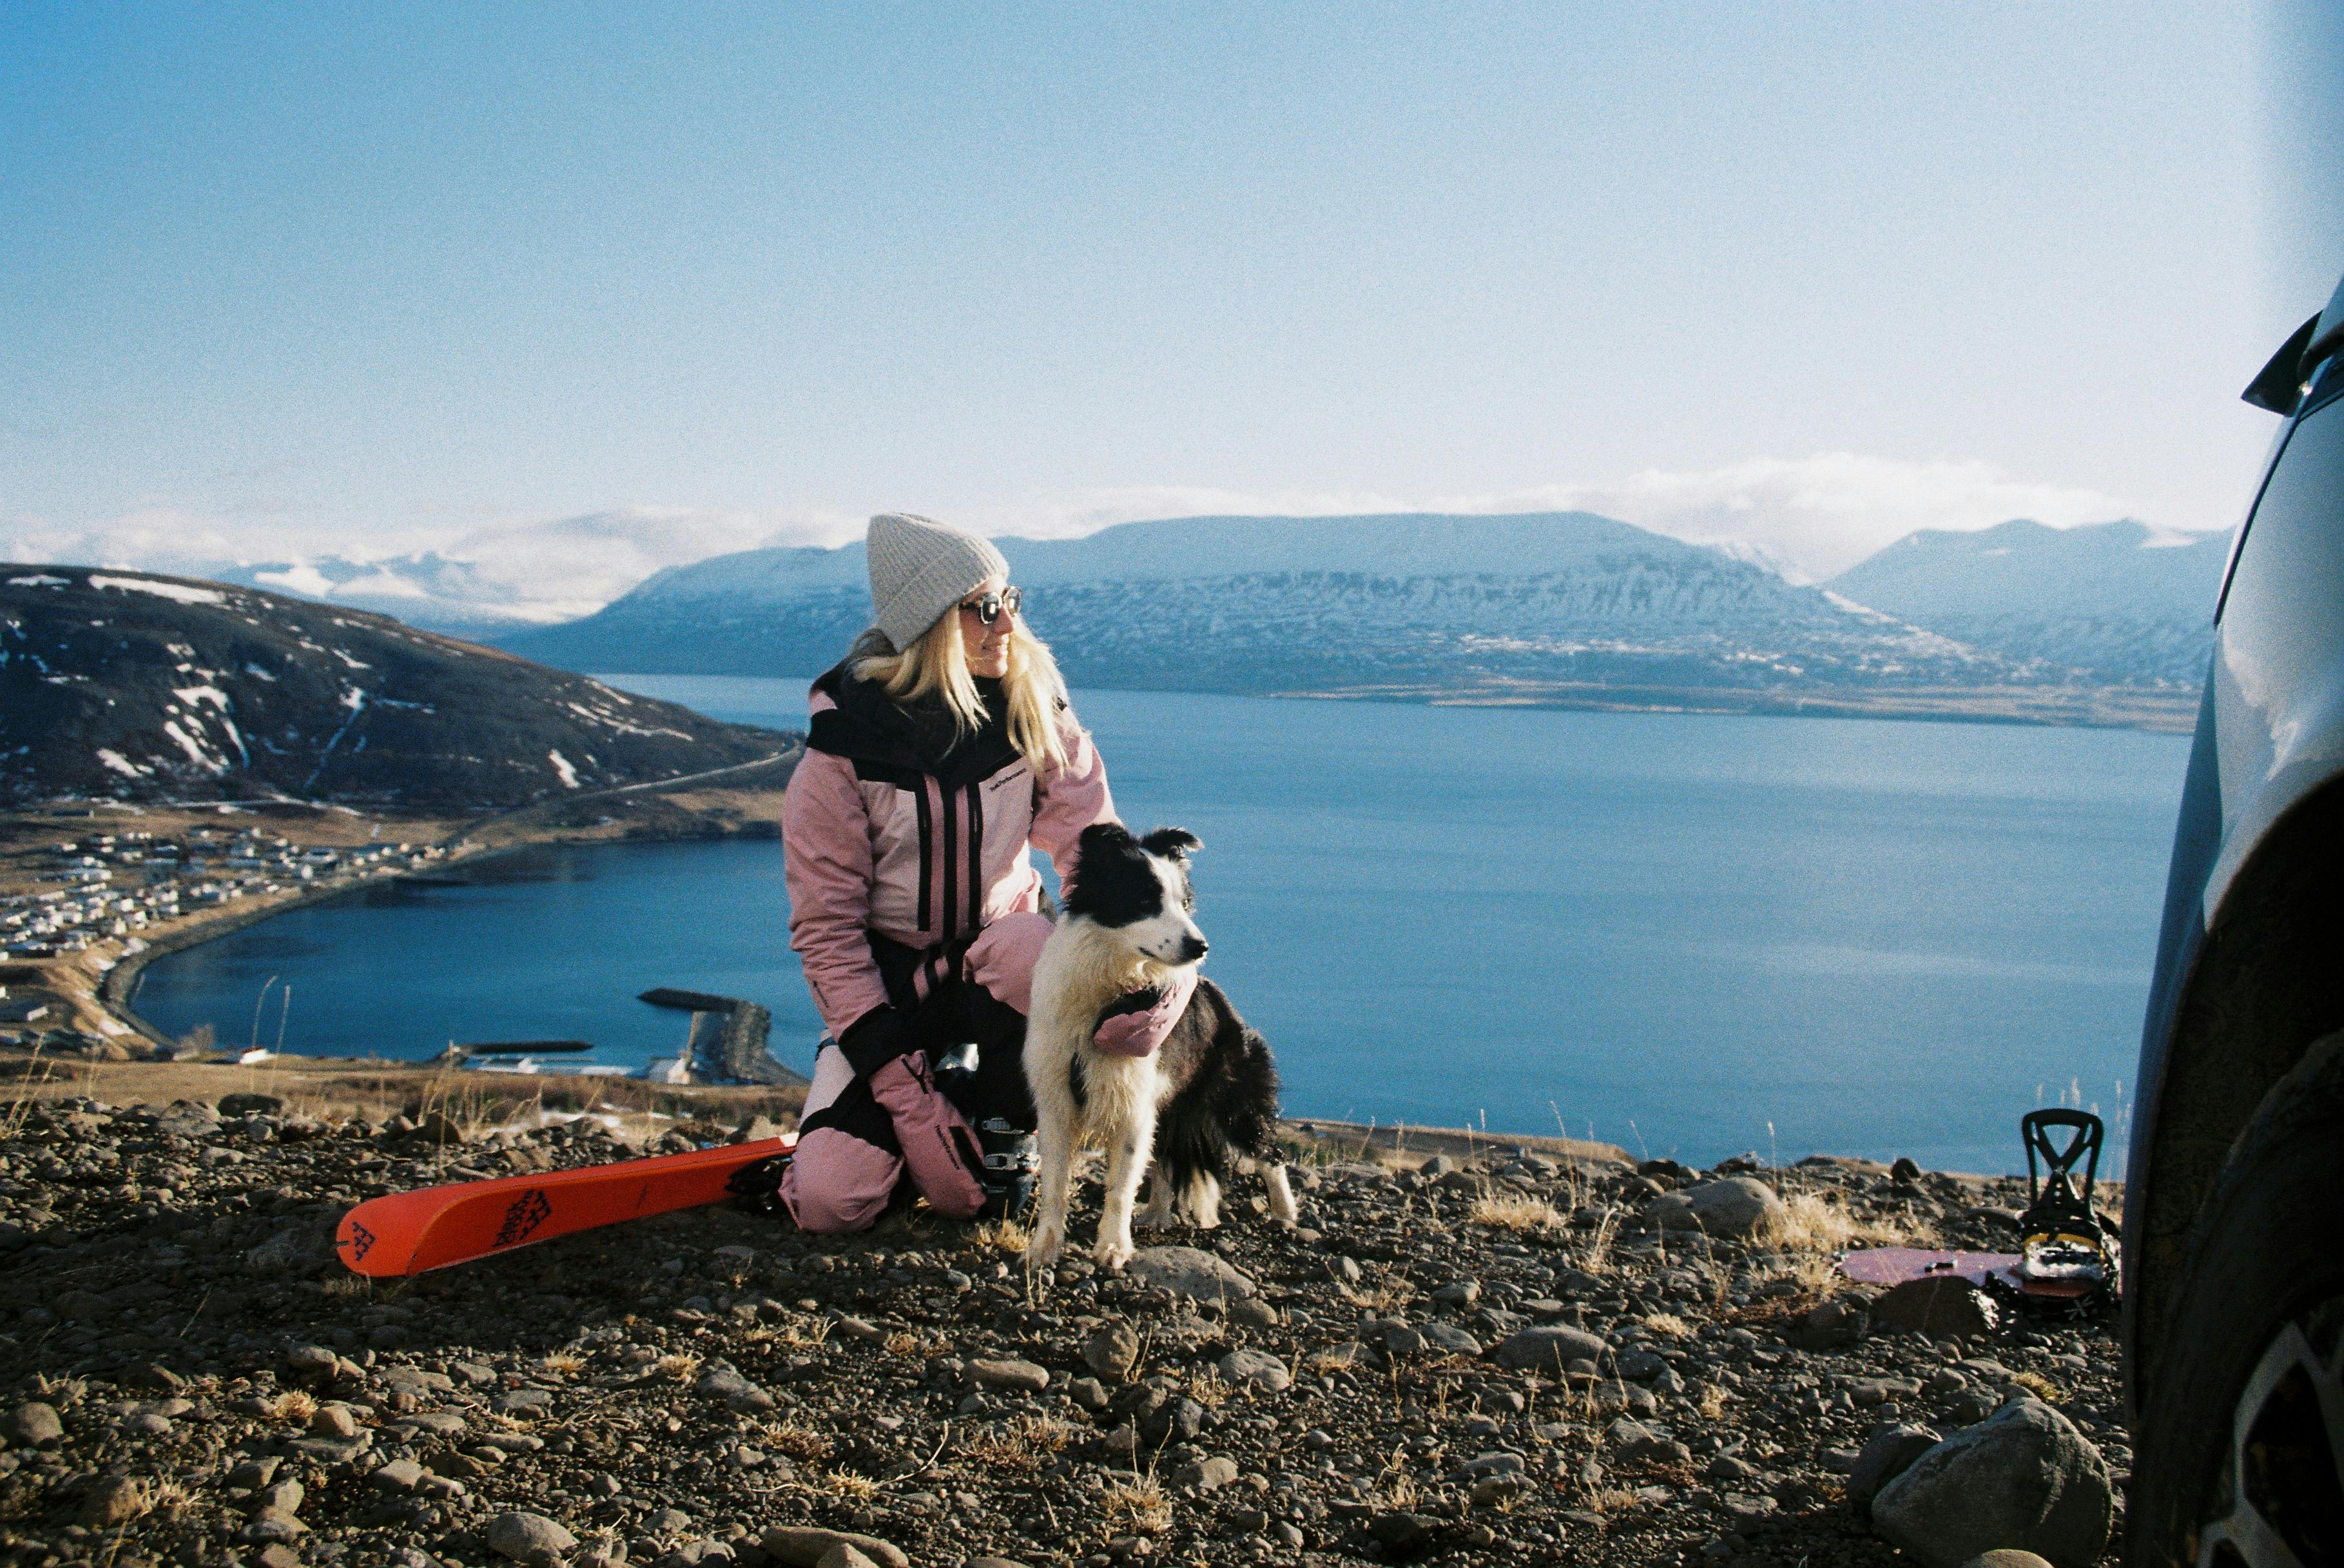 Katha with dog in Iceland in front of the ocean